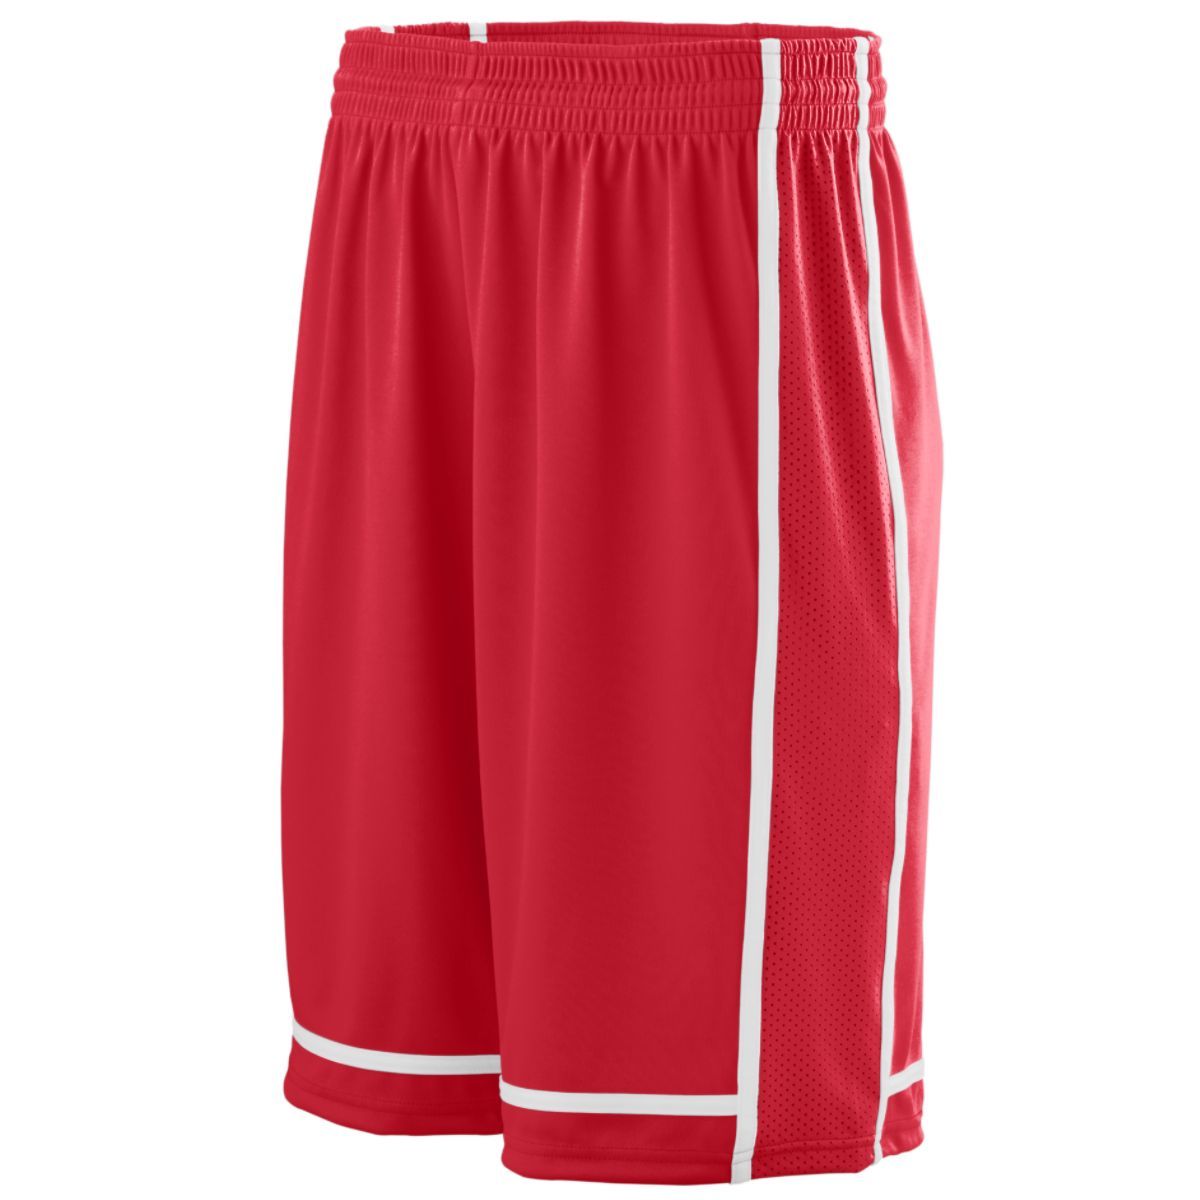 Augusta Sportswear Winning Streak Shorts in Red/White  -Part of the Adult, Adult-Shorts, Augusta-Products, Basketball, All-Sports, All-Sports-1 product lines at KanaleyCreations.com